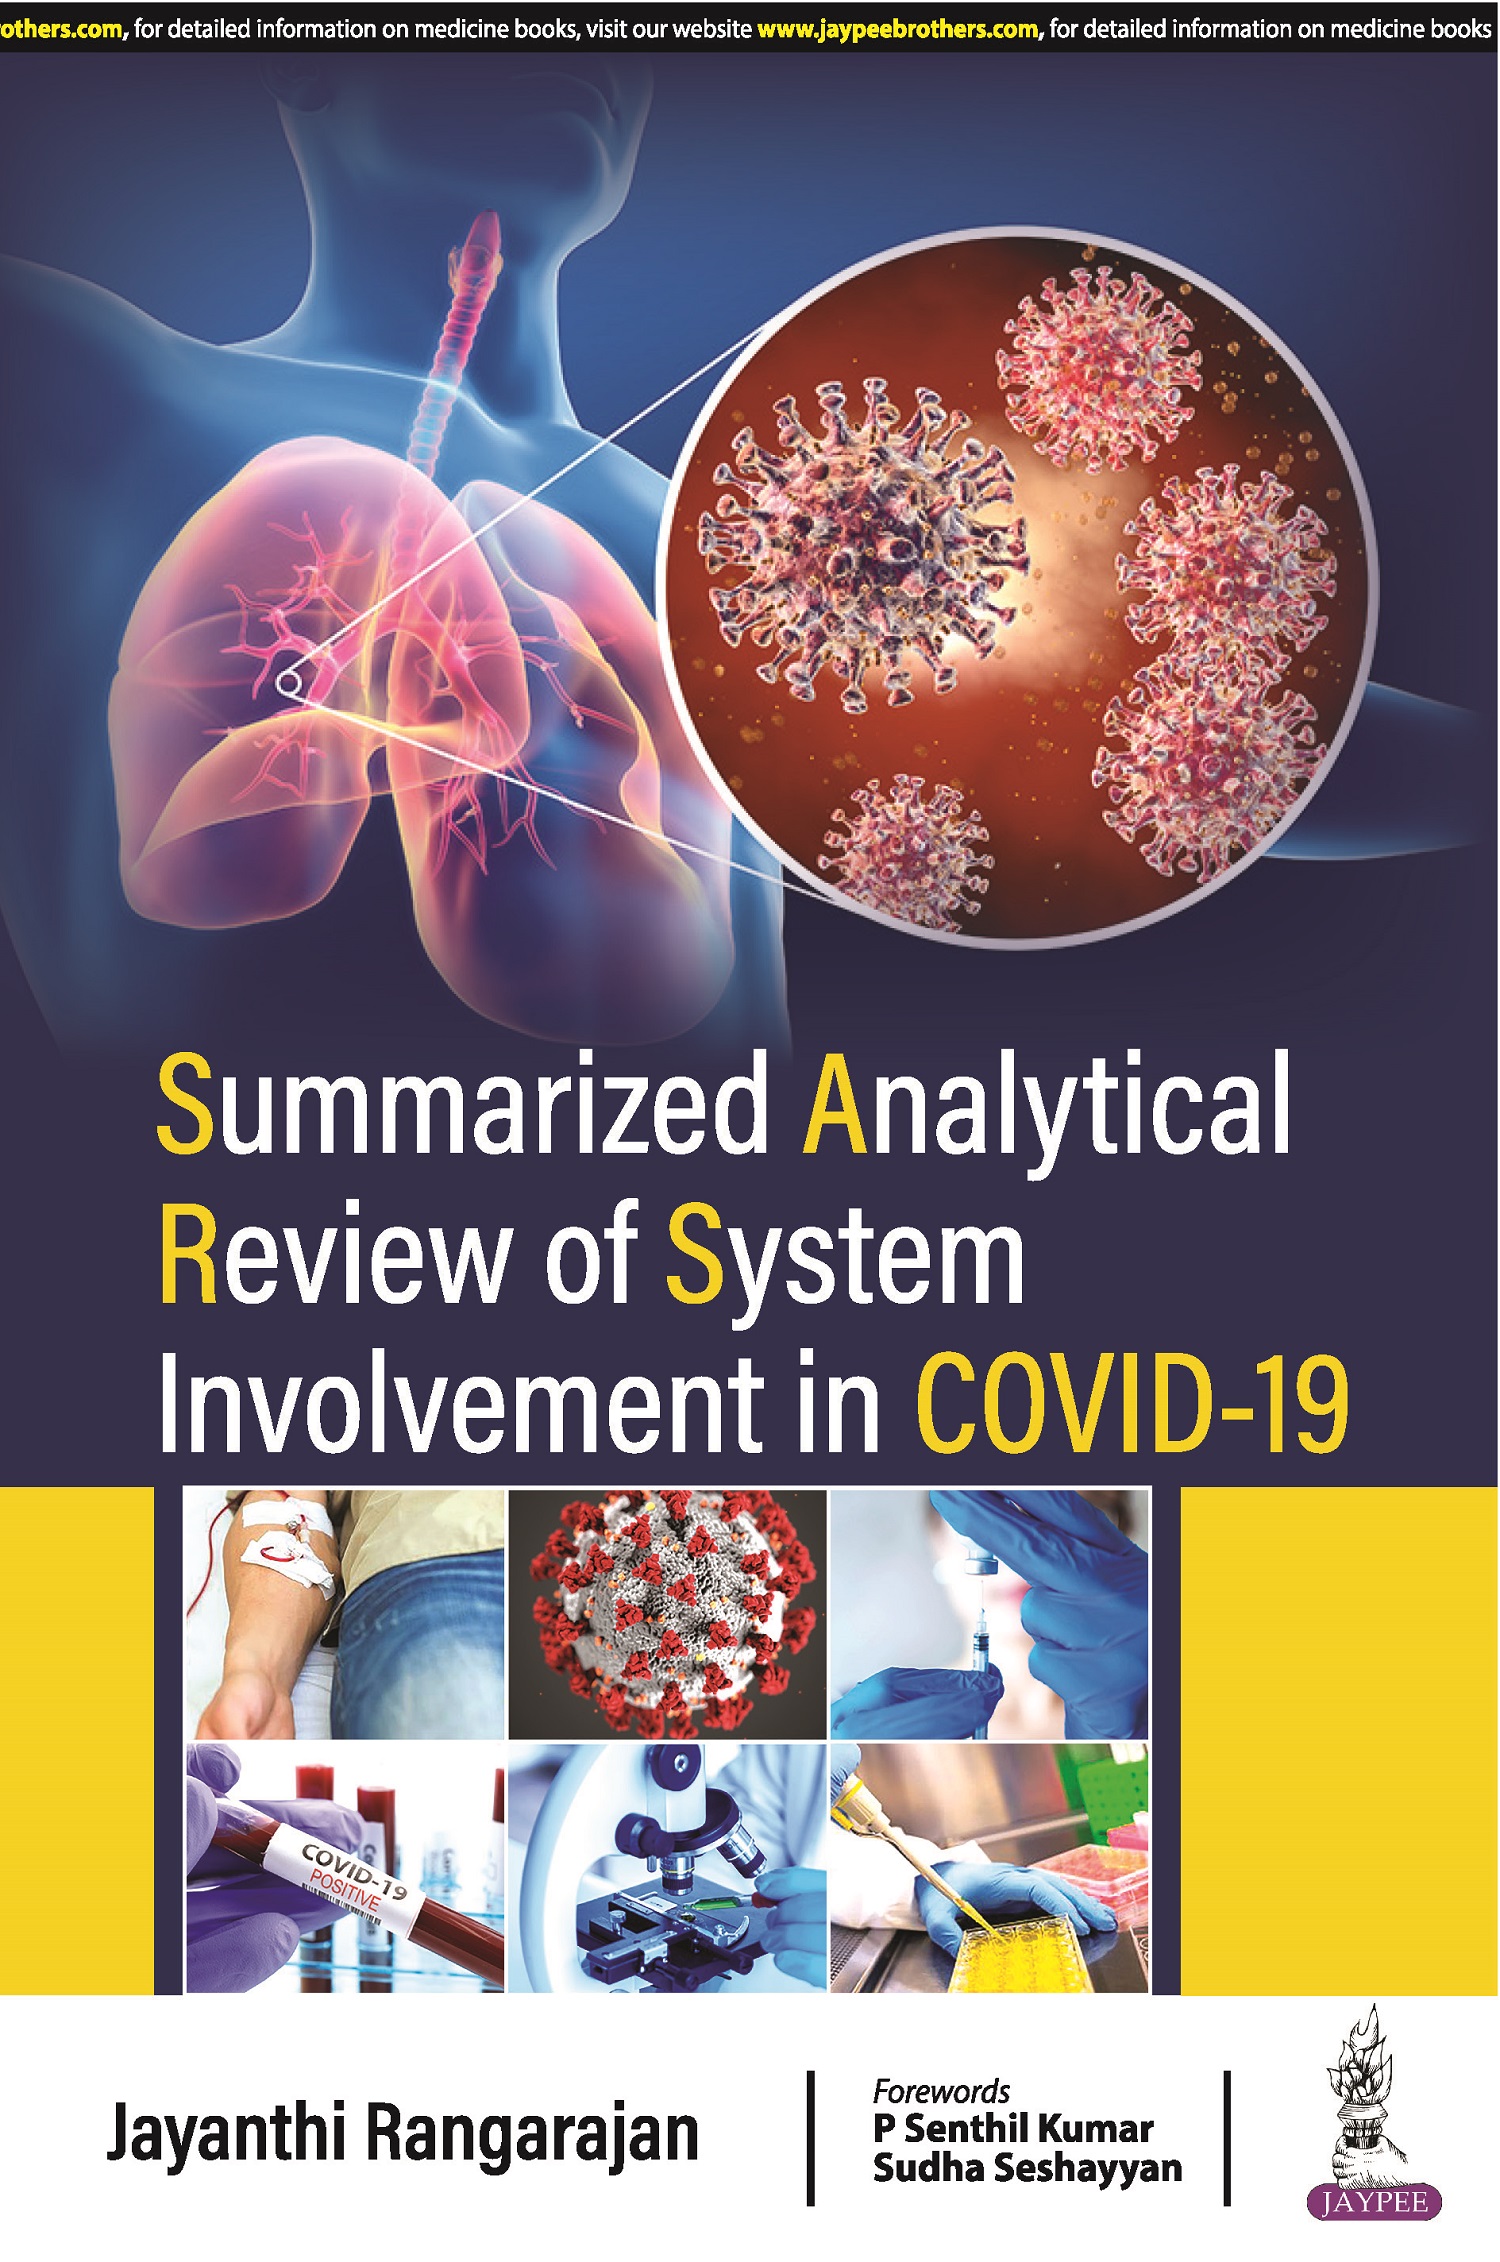 Summarized Analytical Review of System Involvement in COVID-19